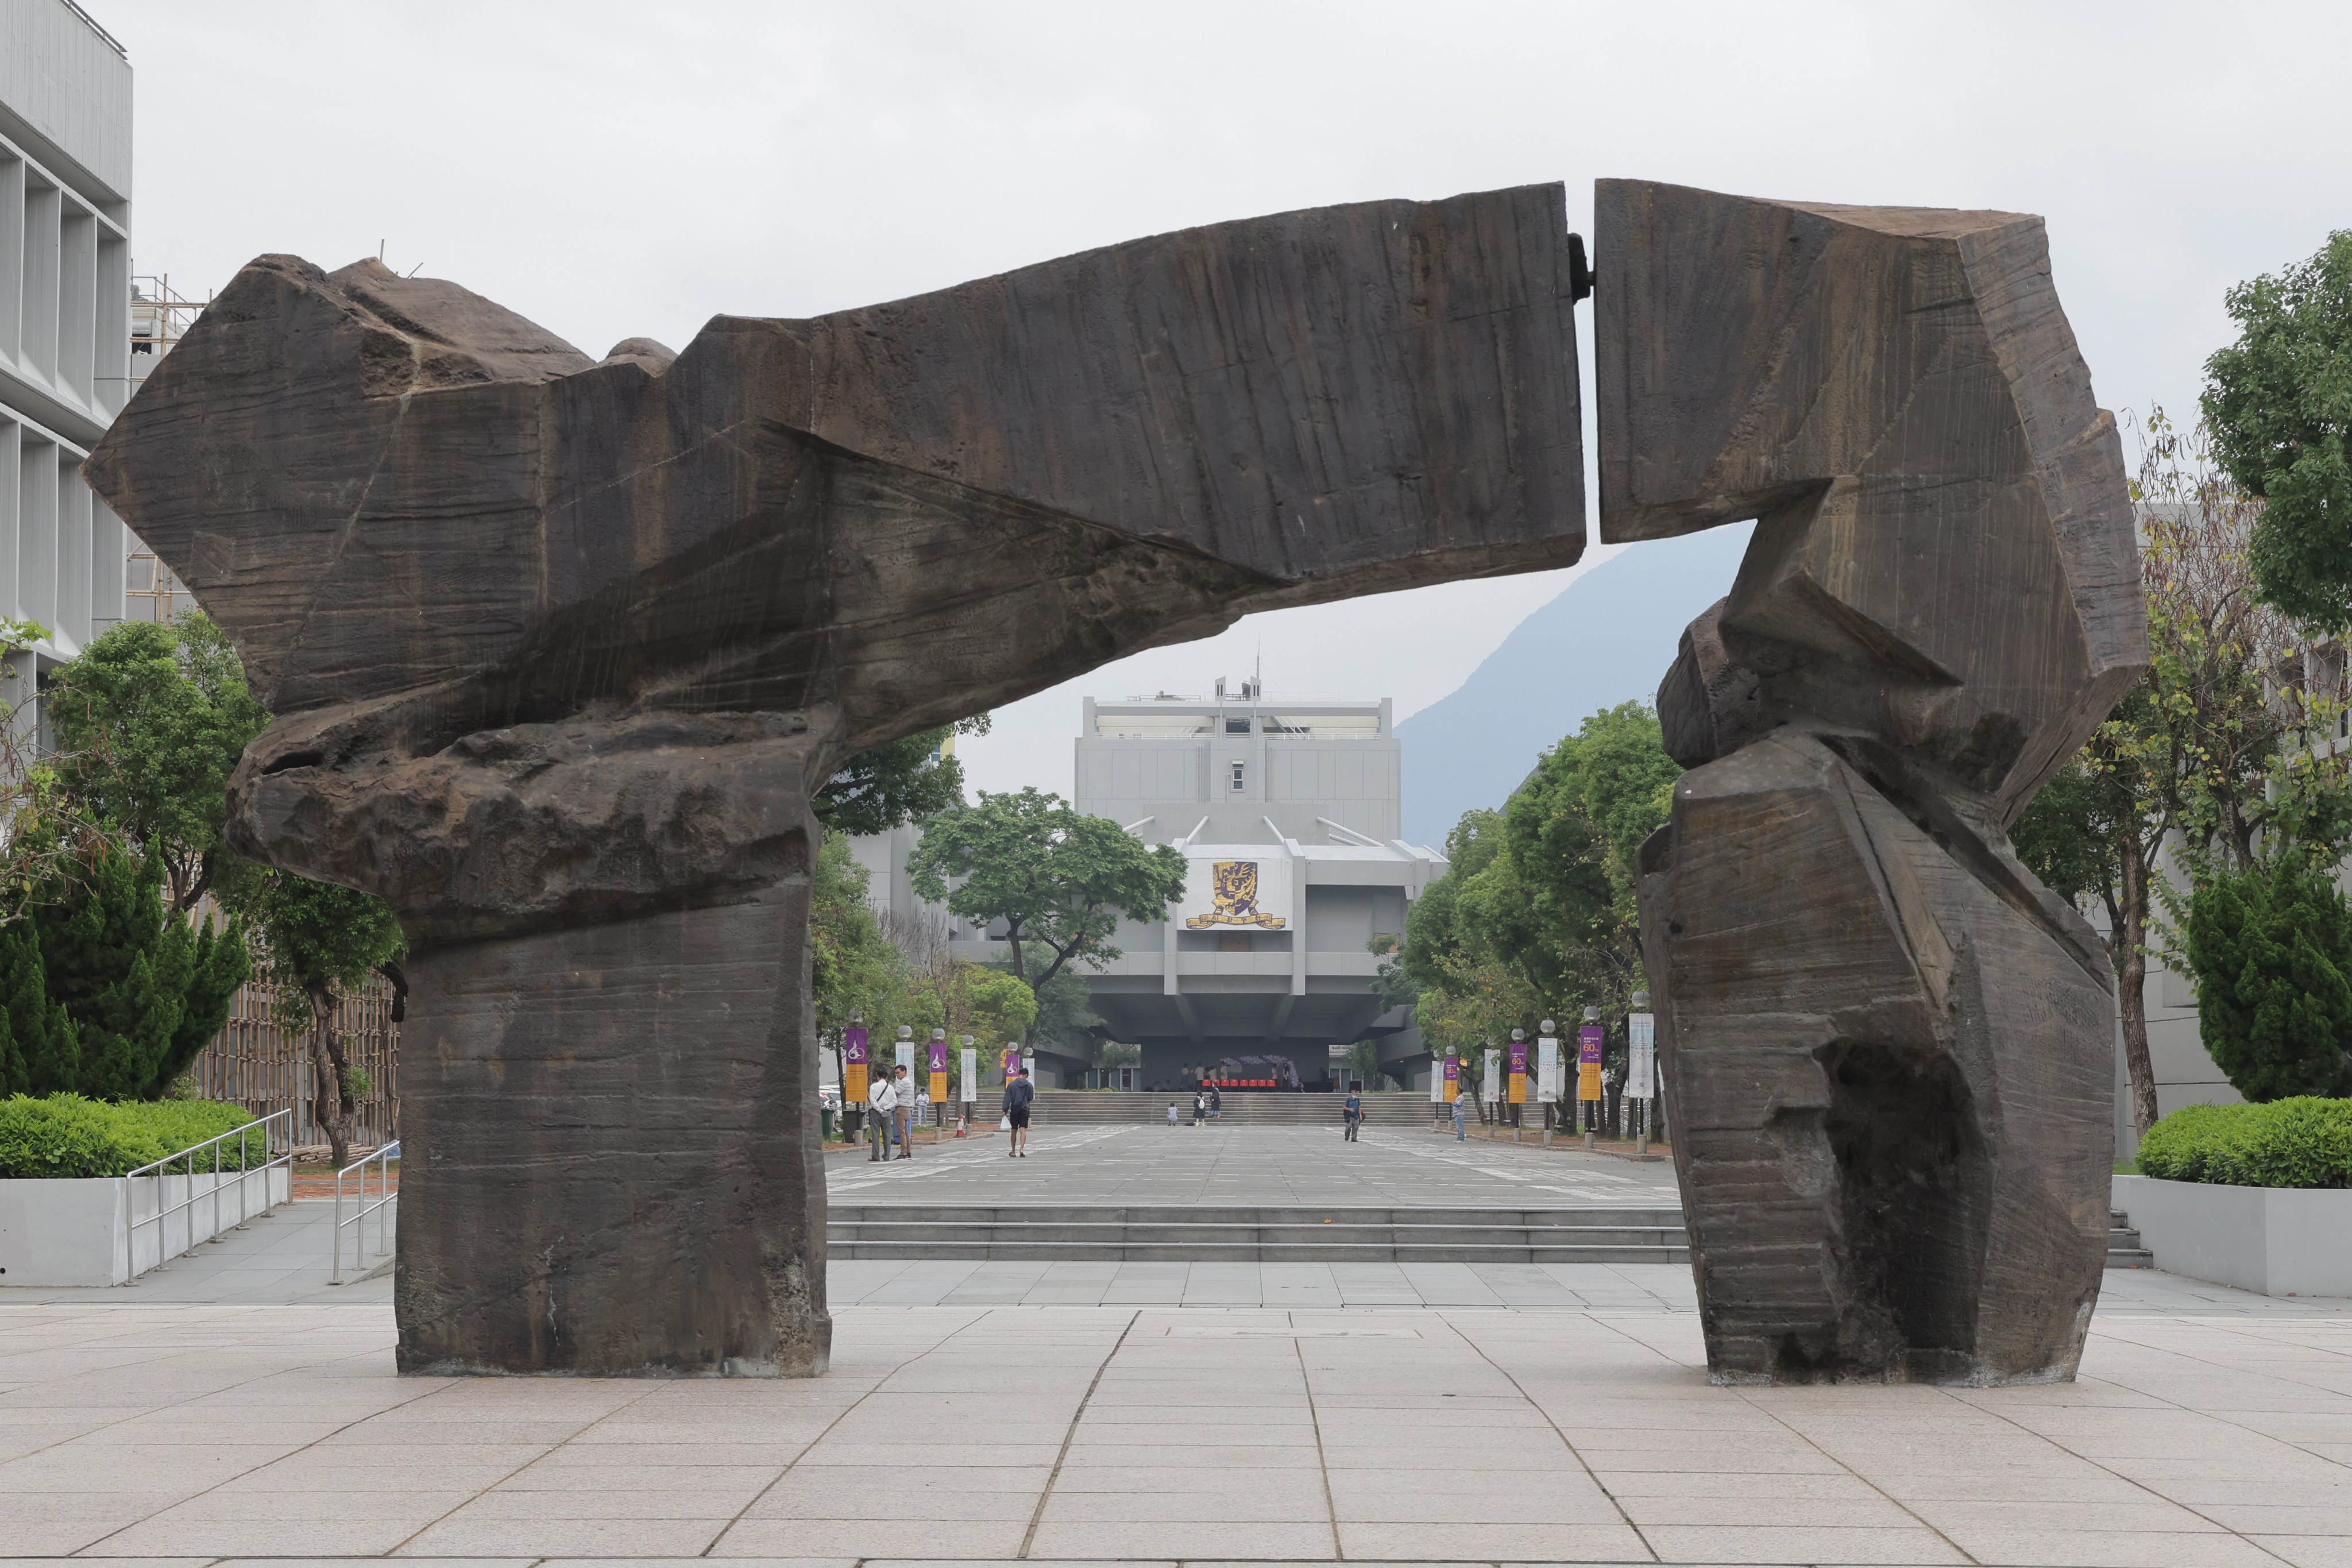 A view of the “Gate of Wisdom”, a sculpture on the Chinese University campus. Photo: Jelly Tse